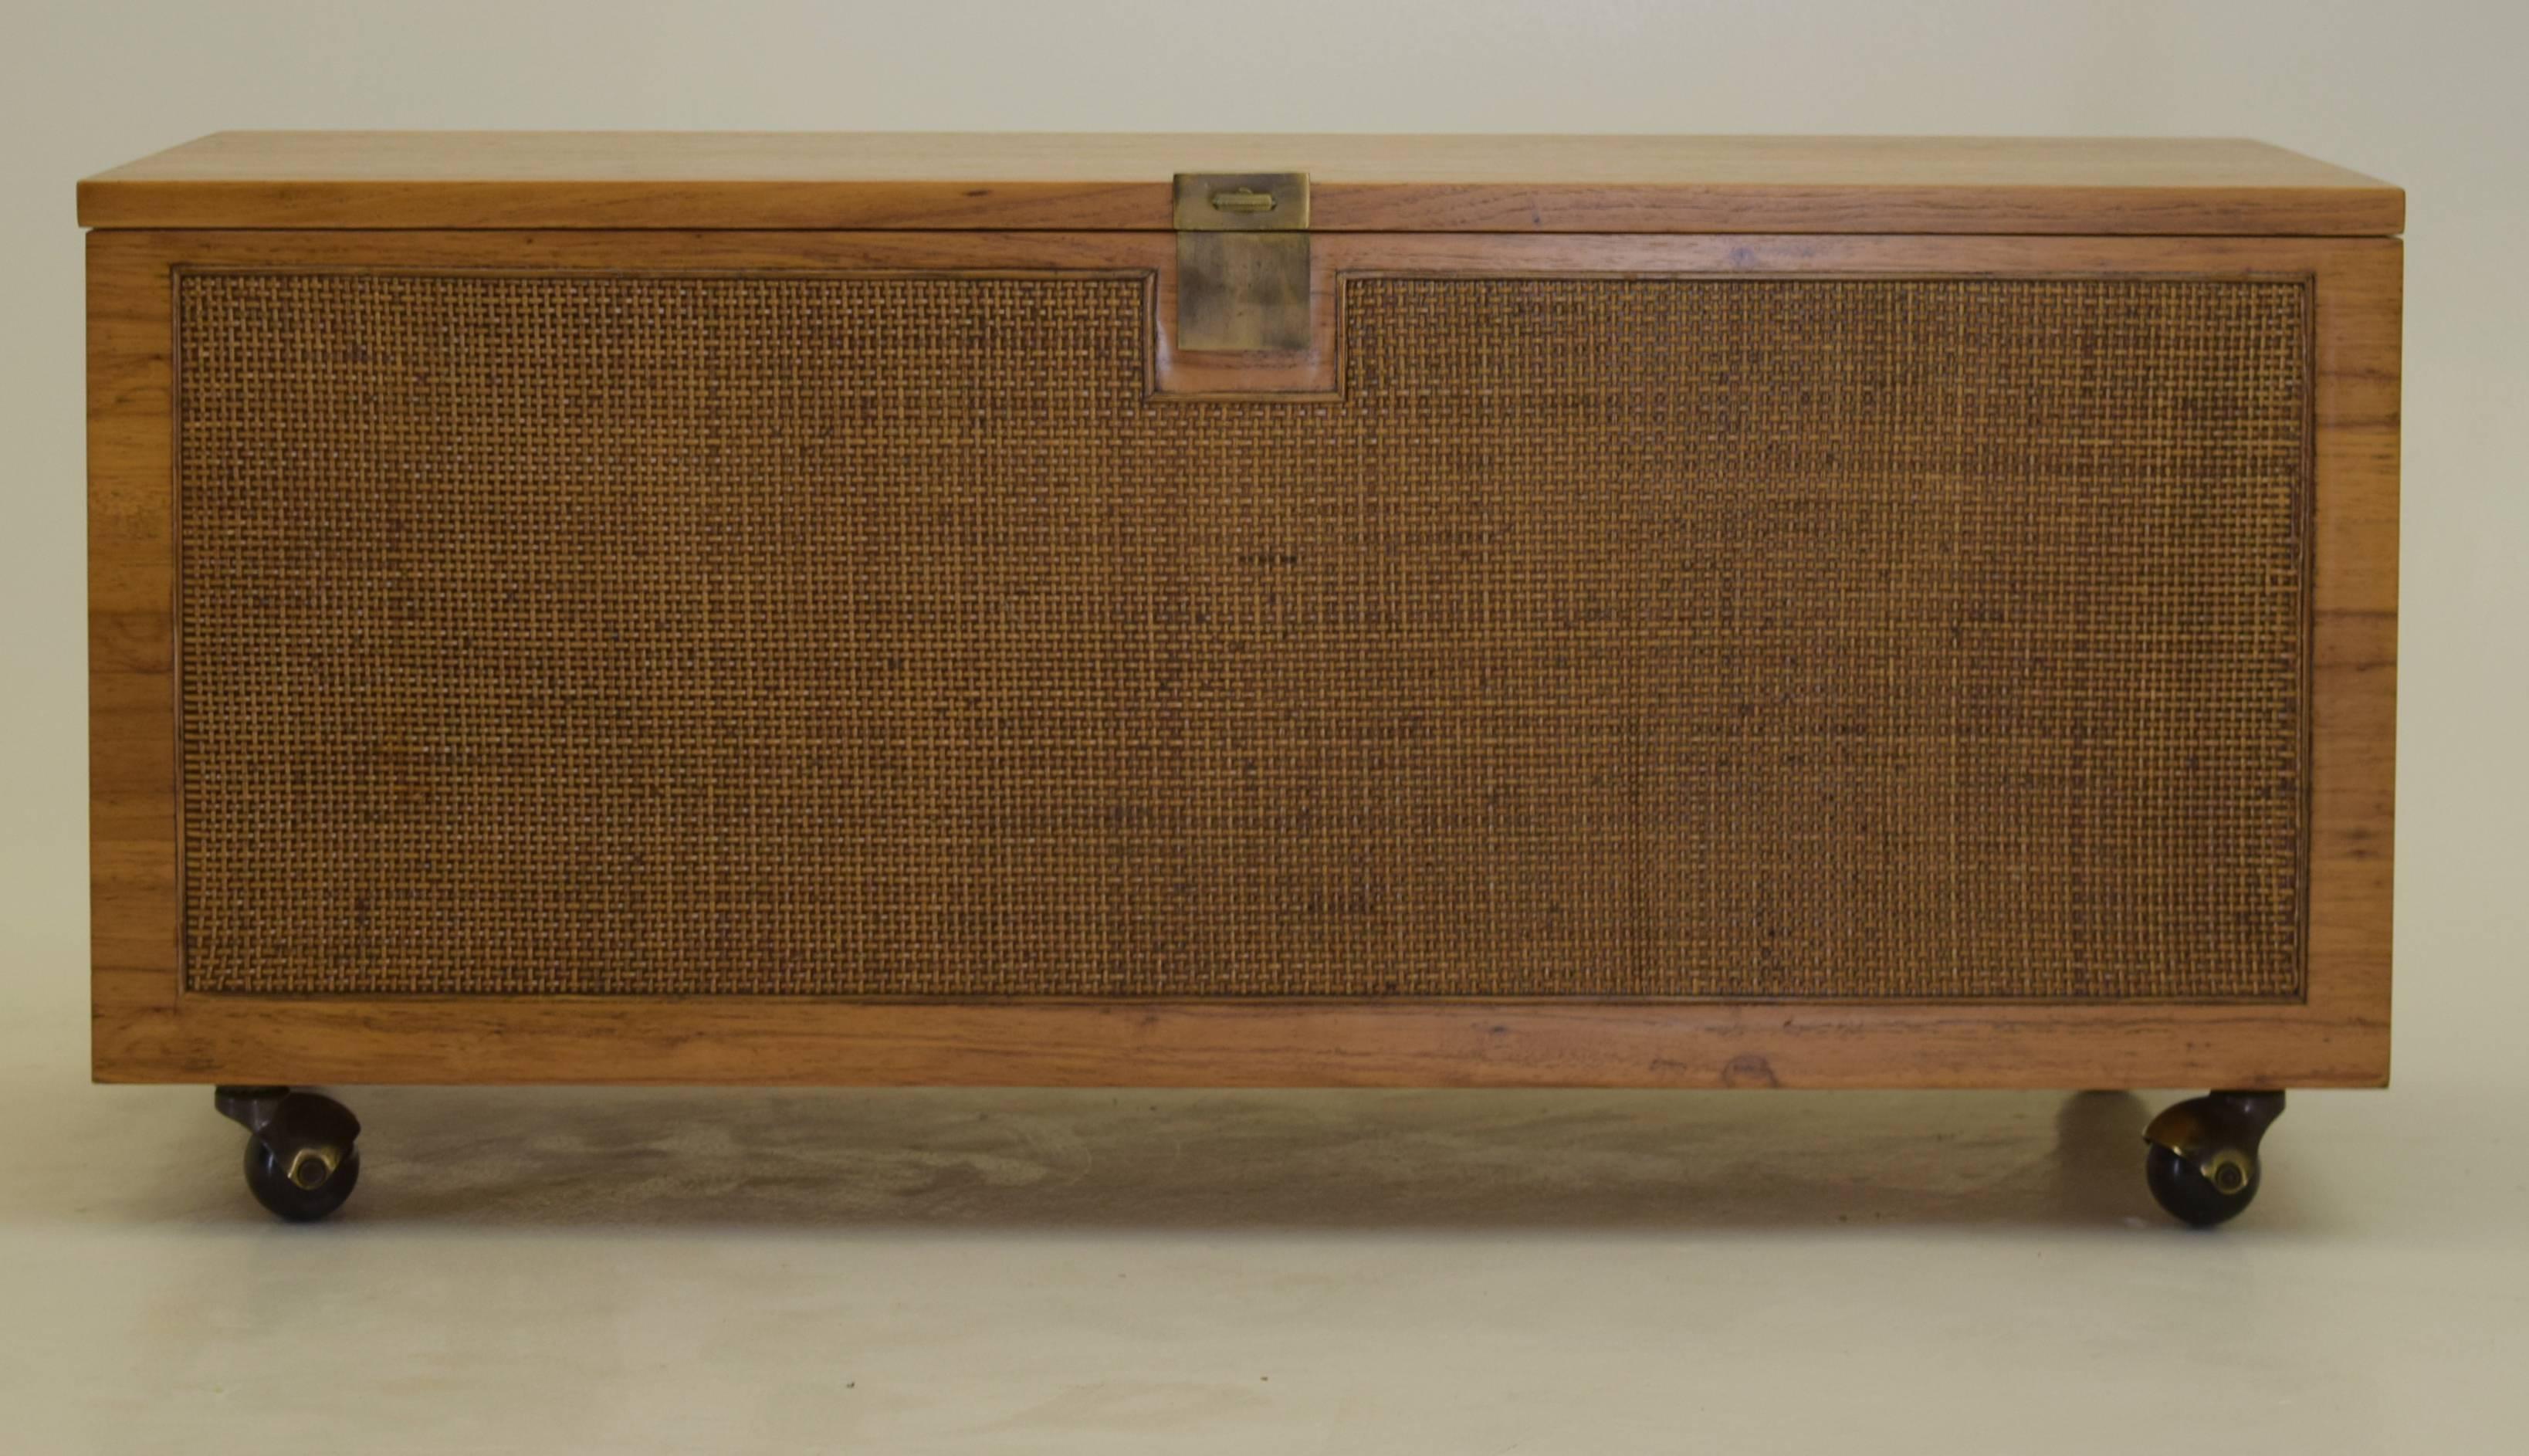 Assumed American Production, but possibly produced in Denmark,
circa 1970
Teak, brass, woven rattan
Measure: 18 tall x 18 deep and 39 inches wide

Storage chests for blankets or bedroom furniture such as this are relatively uncommon for Danish